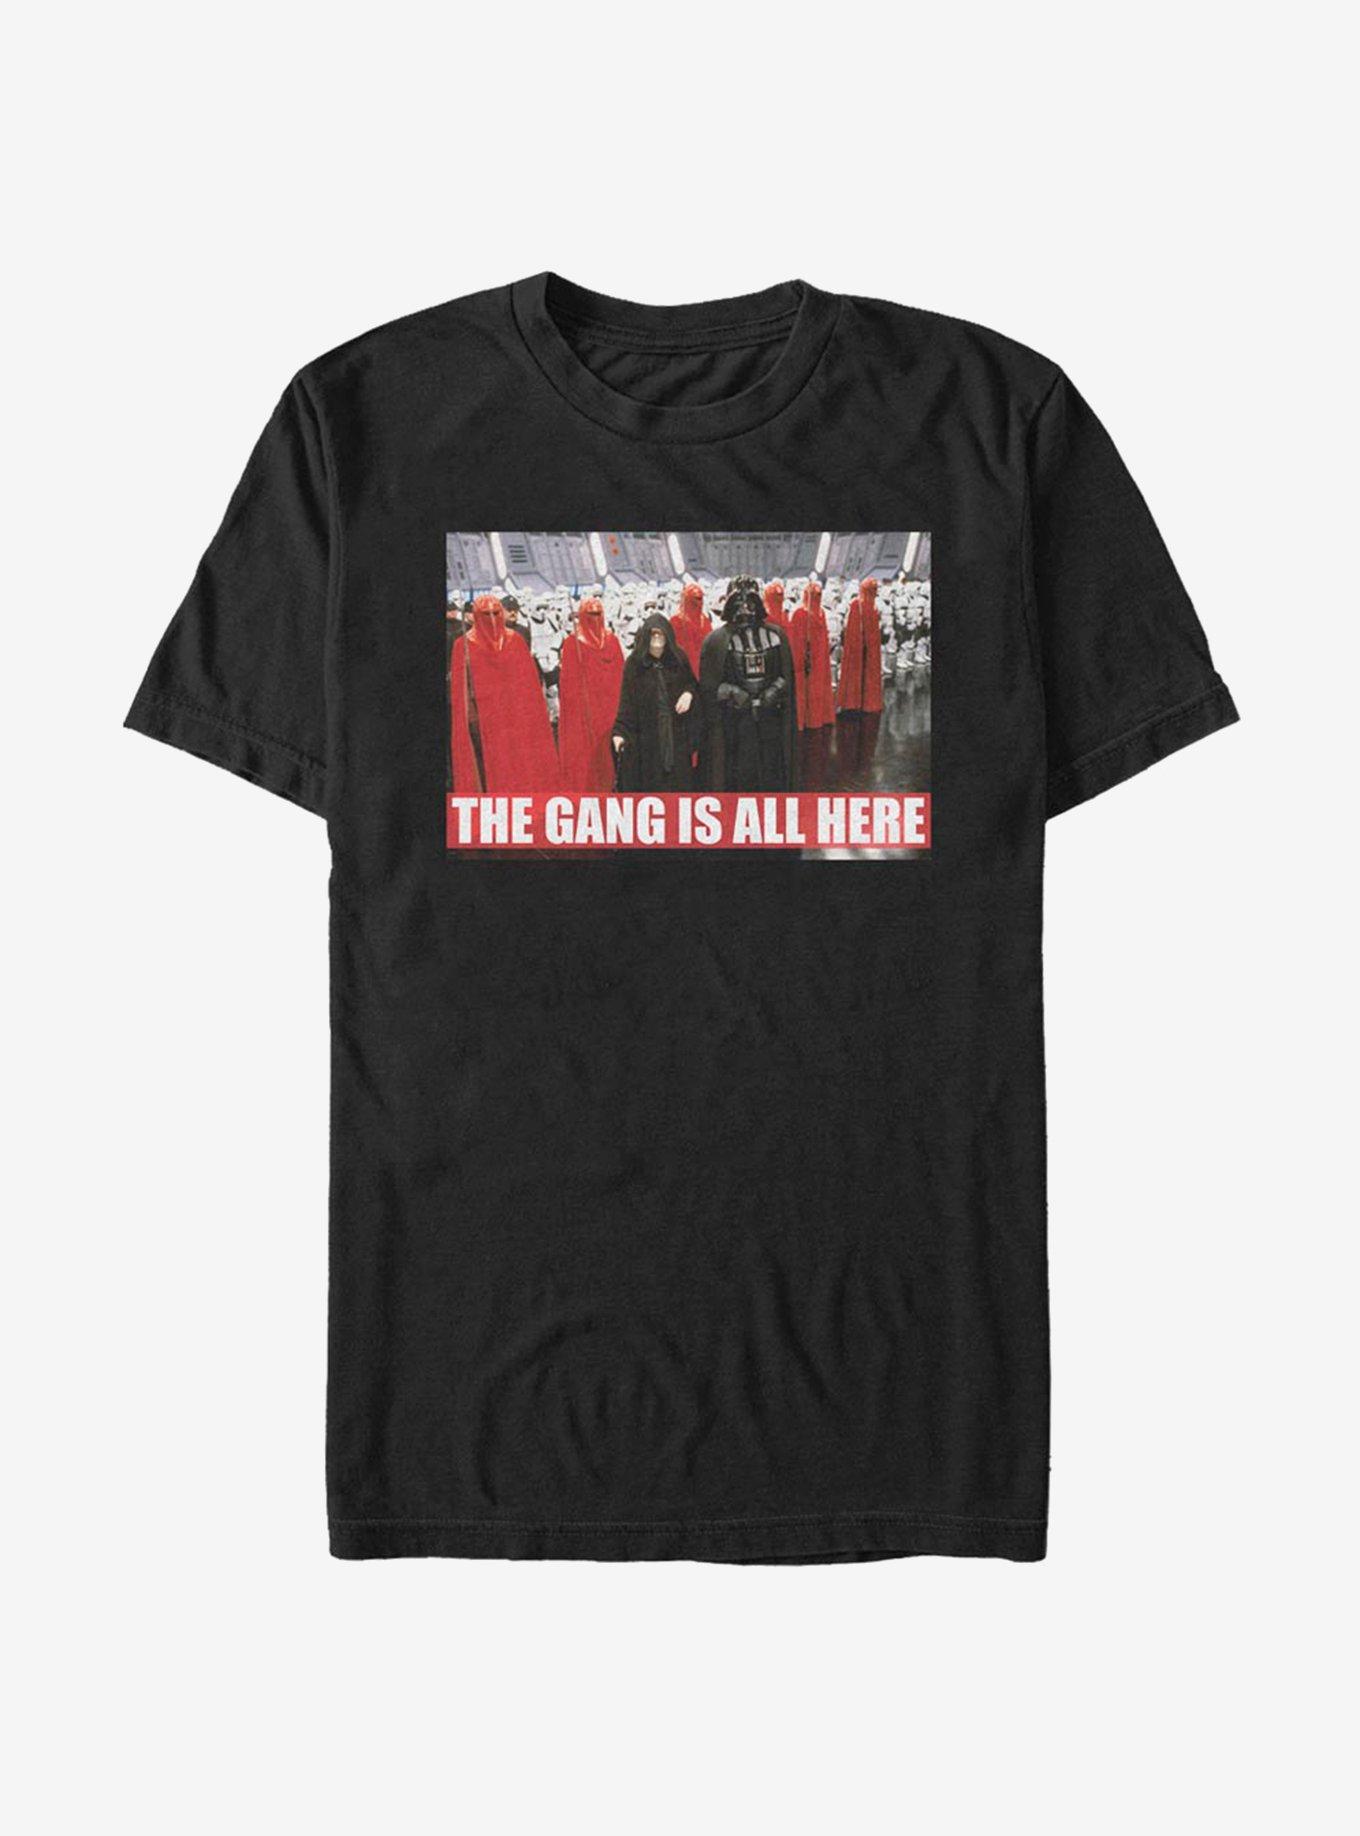 Star Wars The Gang Is All Here T-Shirt, BLACK, hi-res